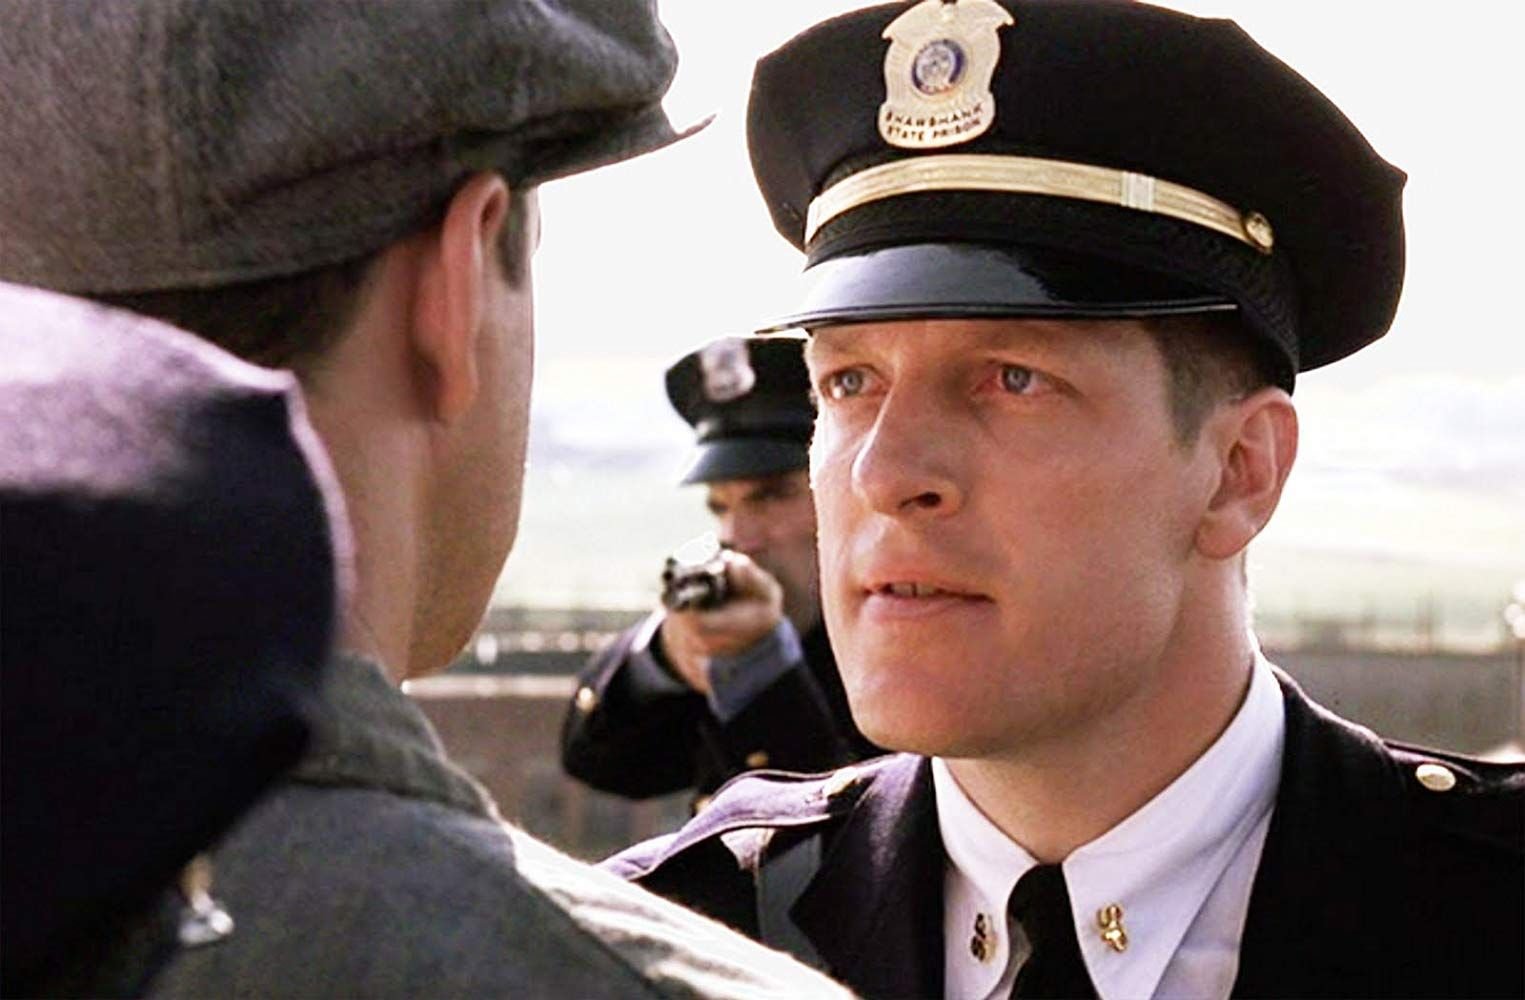 The great Clancy Brown is celebrating his 63rd birthday today!

Happy birthday to an amazing actor. 